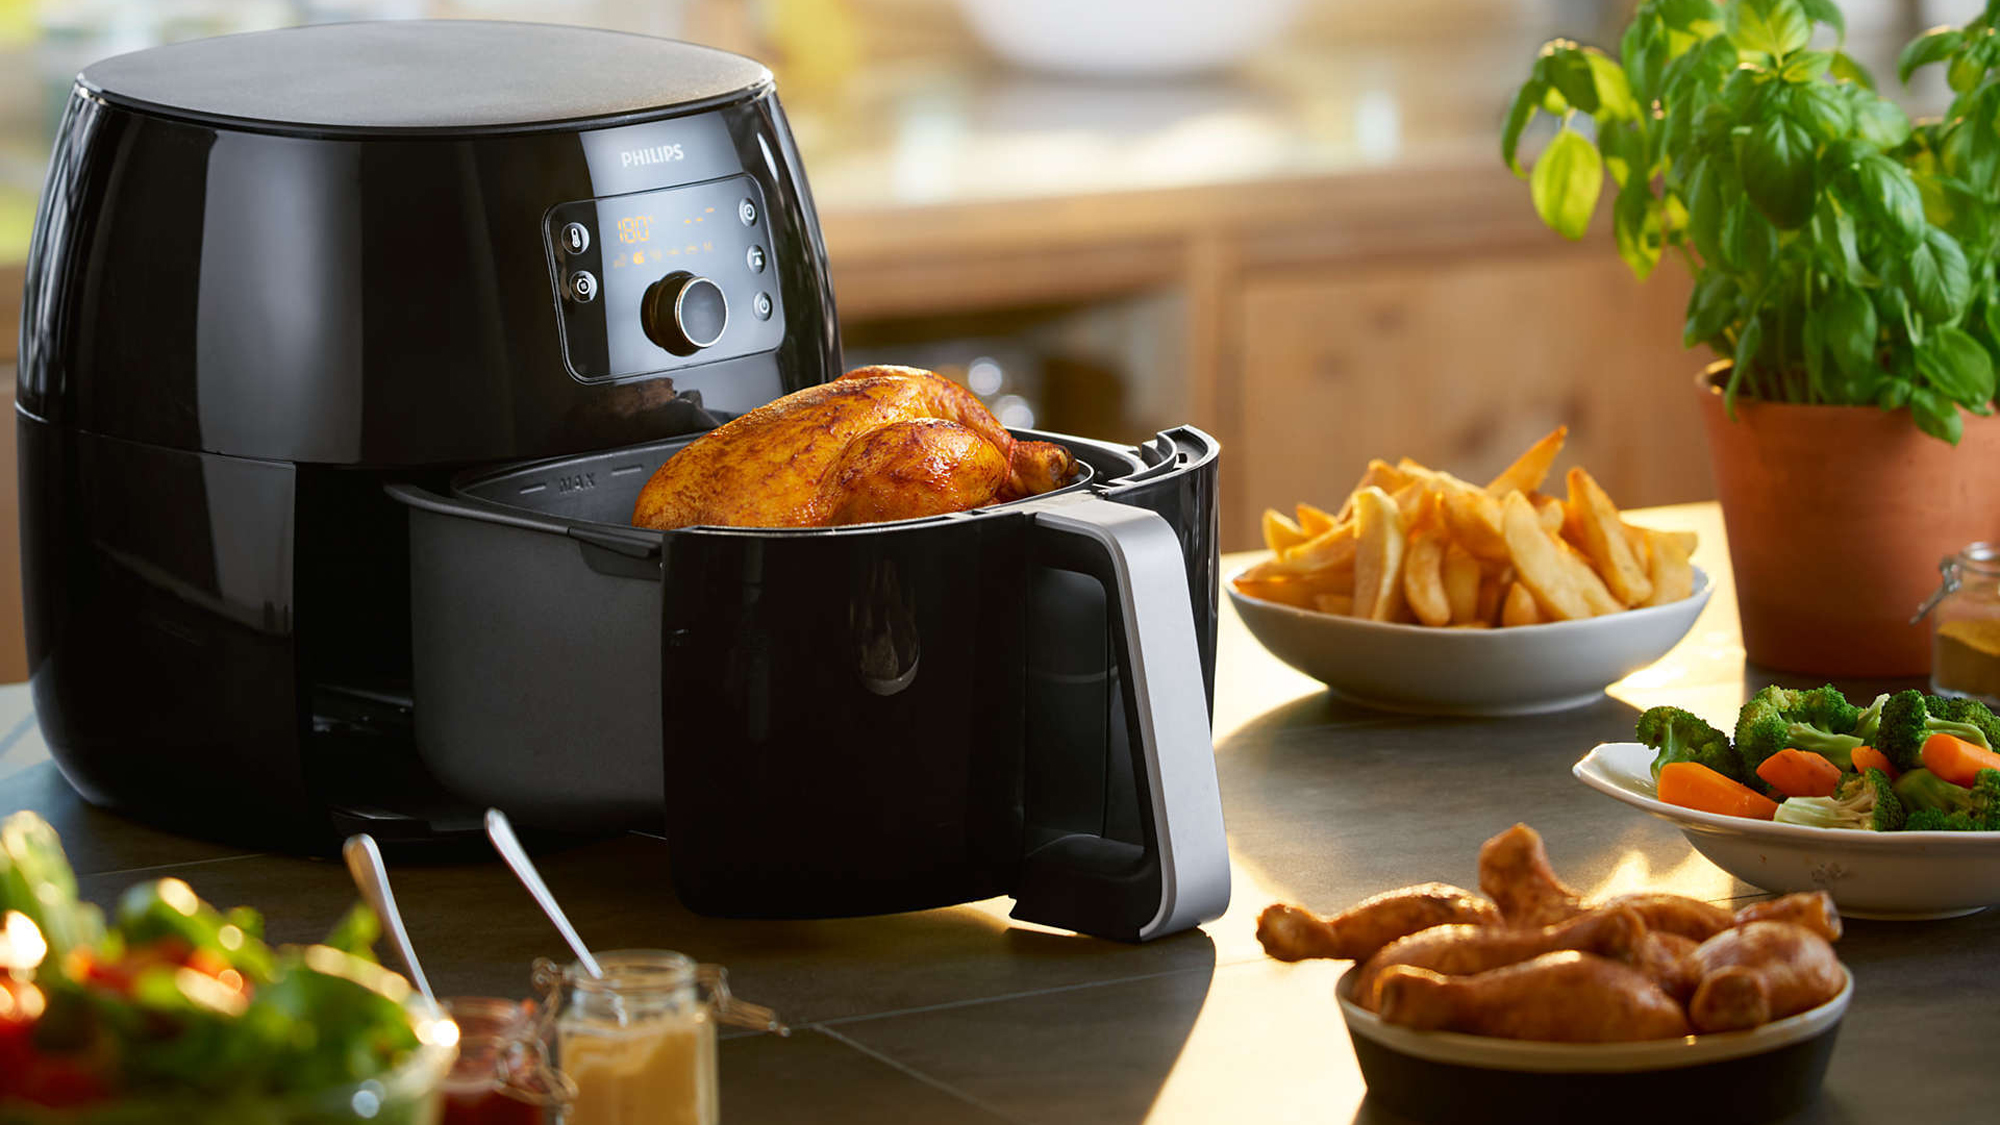  Philips Kitchen Appliances Premium Digital Airfryer with Fat  Removal Technology + Recipe Cookbook, 3 qt, Black, HD9741/99, X-Large :  Home & Kitchen